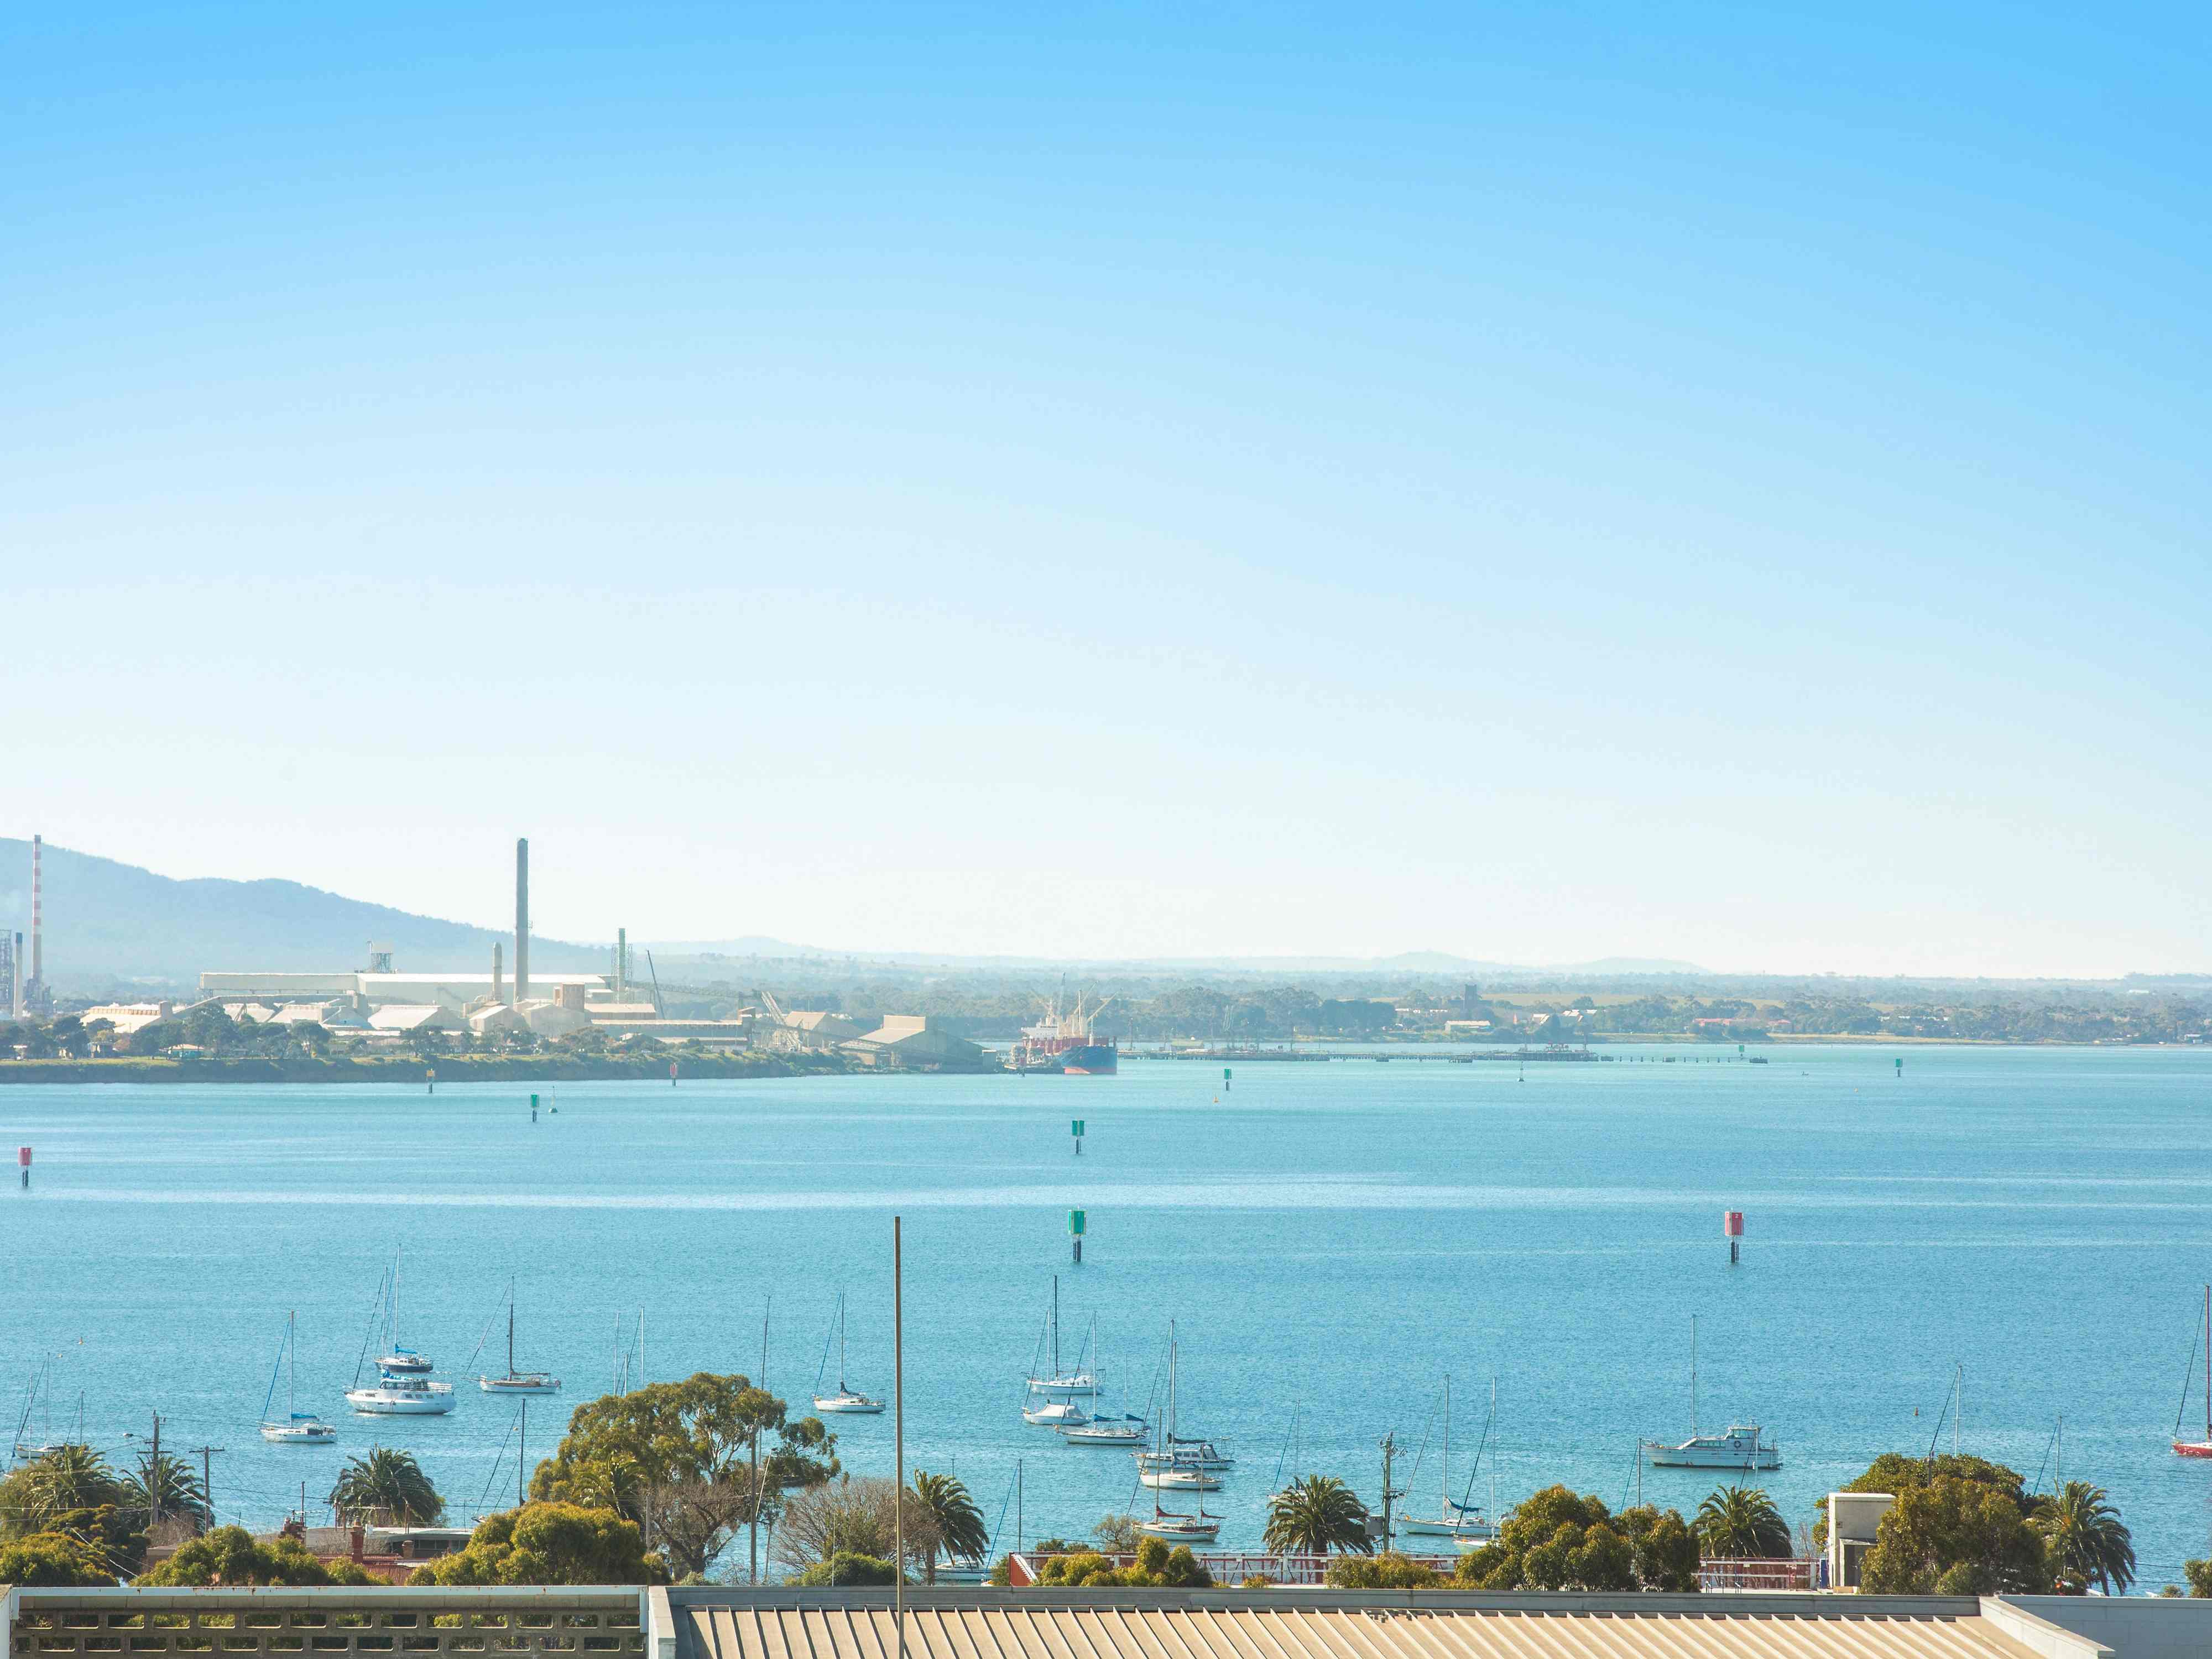 Take in the views from Holiday Inn & Suites Geelong over Corio Bay